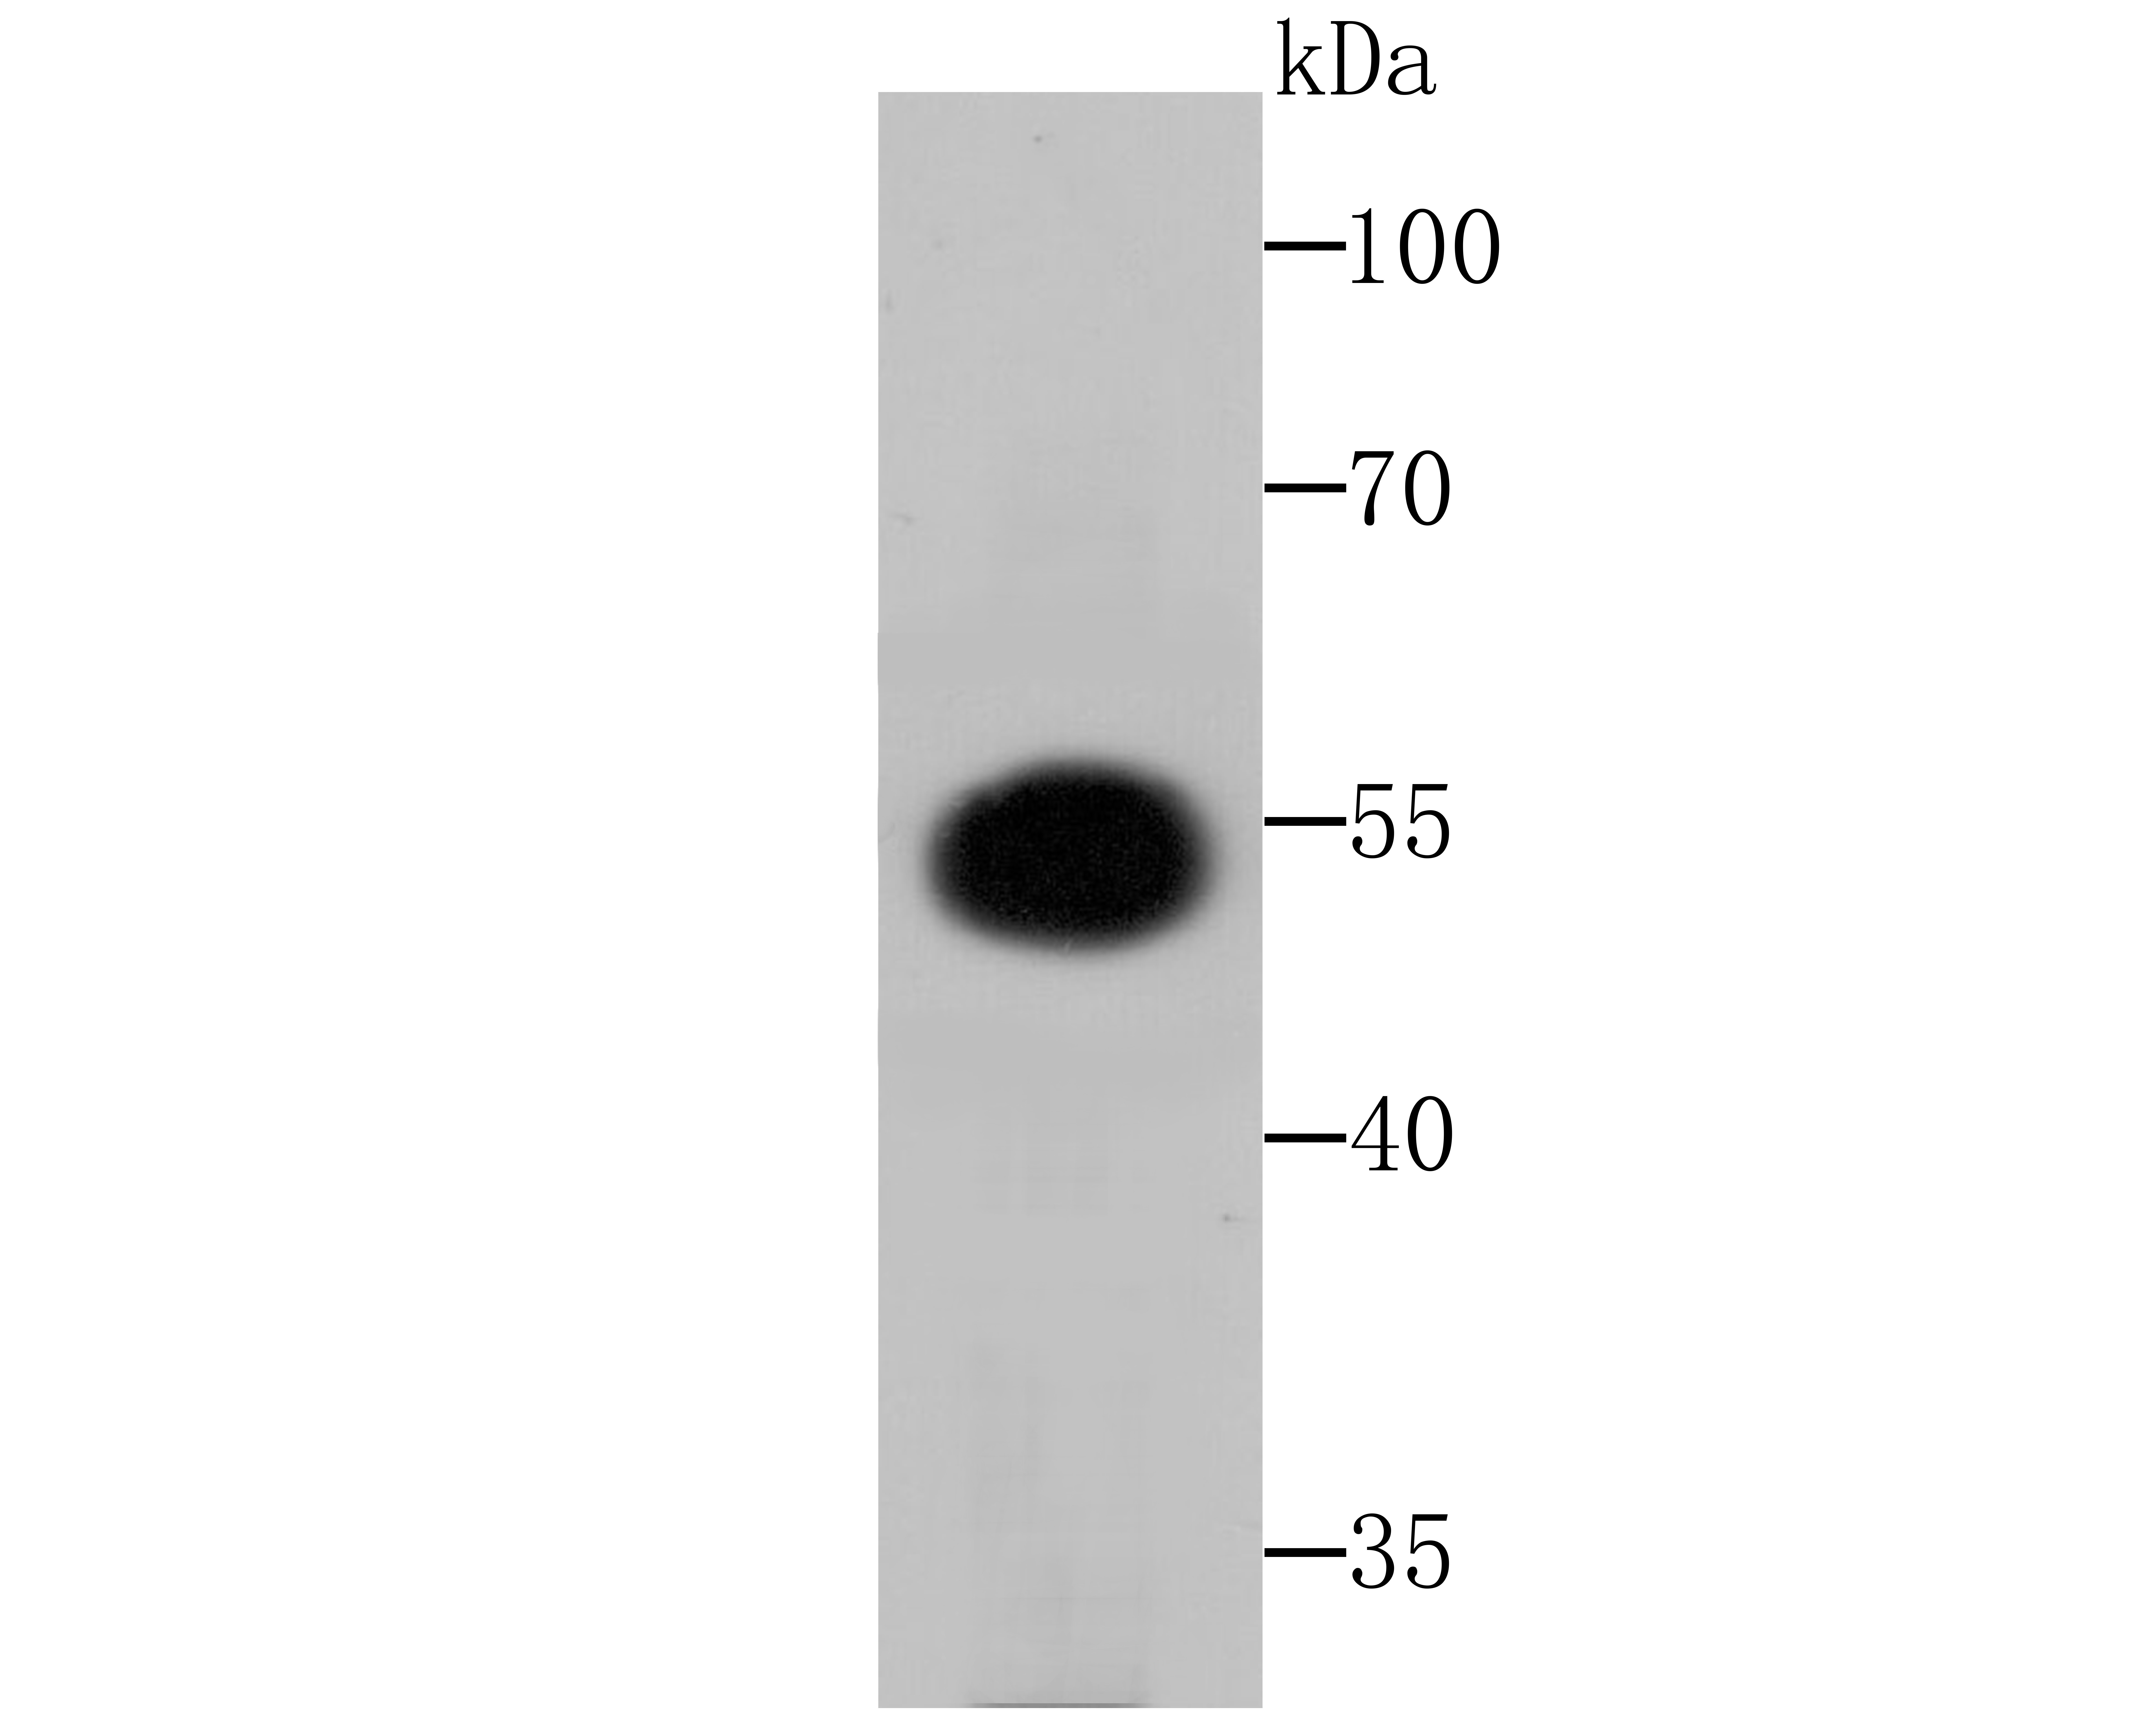 Western blot analysis of Fusion glycoprotein F0 on Fusion glycoprotein F0 transfected HEK293 cell lysates using anti- Fusion glycoprotein F0 antibody at 1/500 dilution.